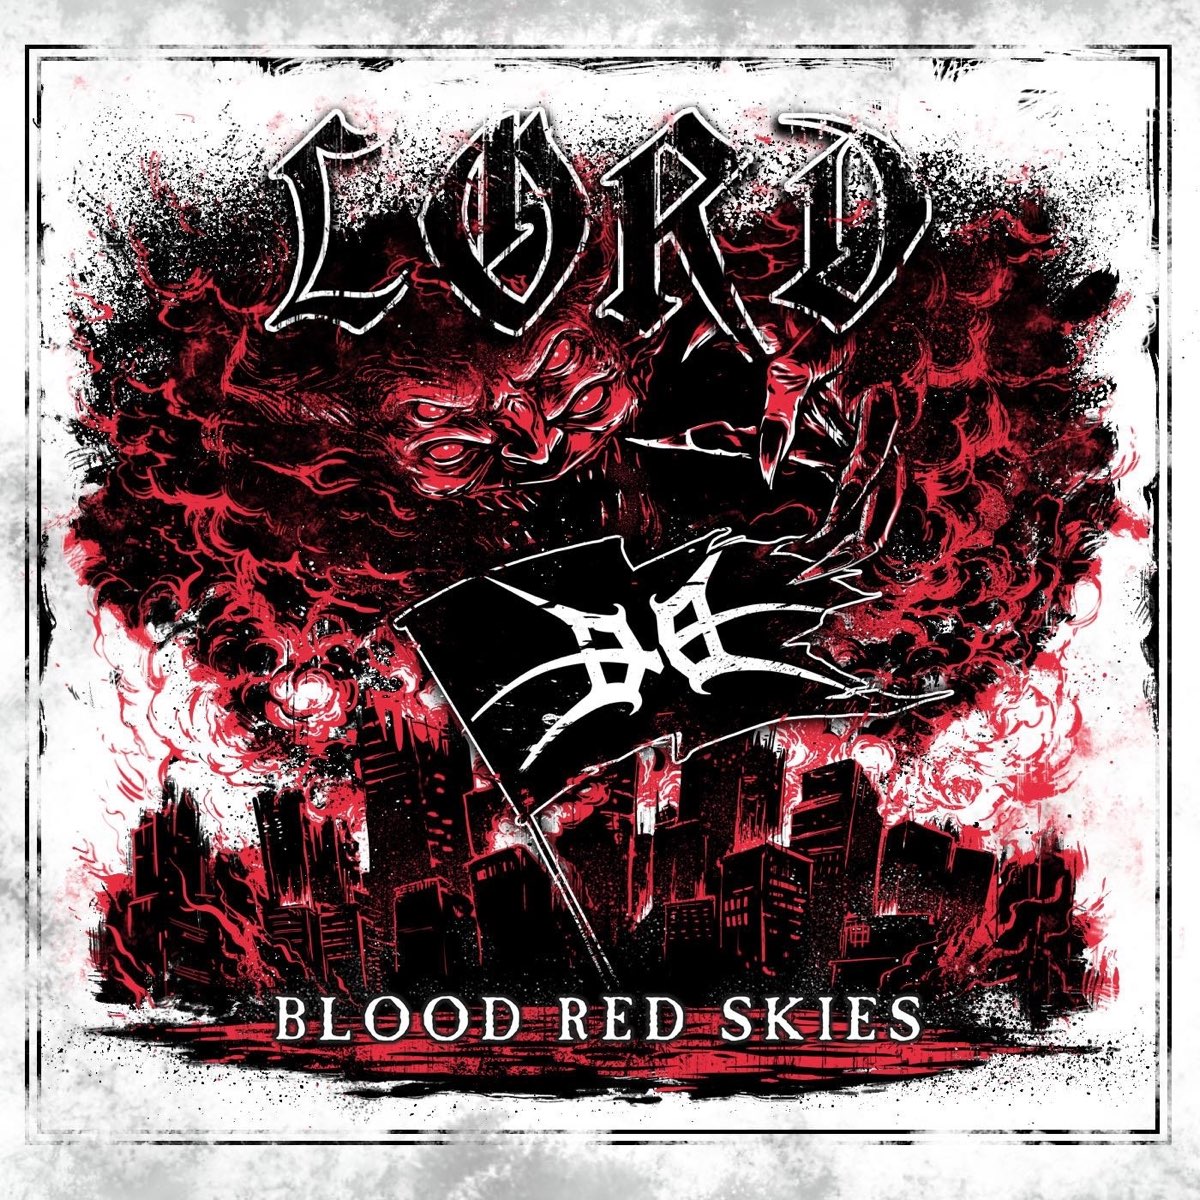 Lords blood